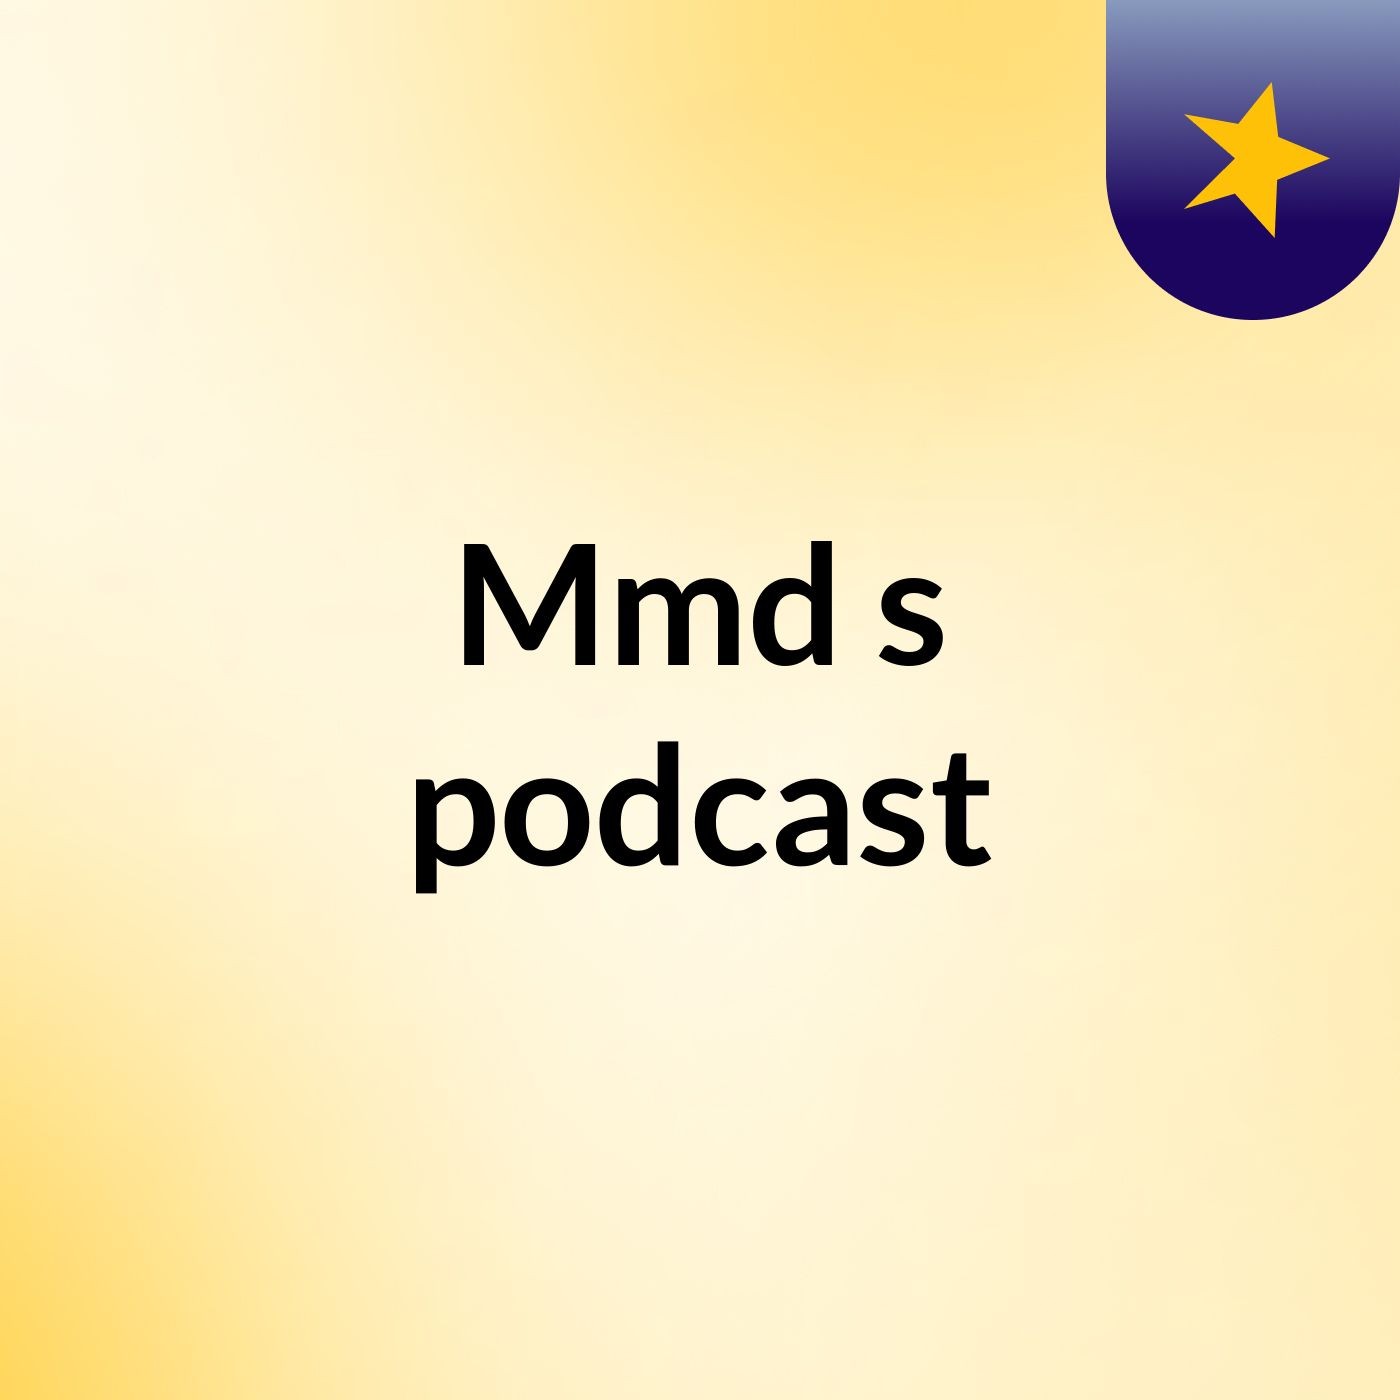 Episode 3 - Mmd's podcast